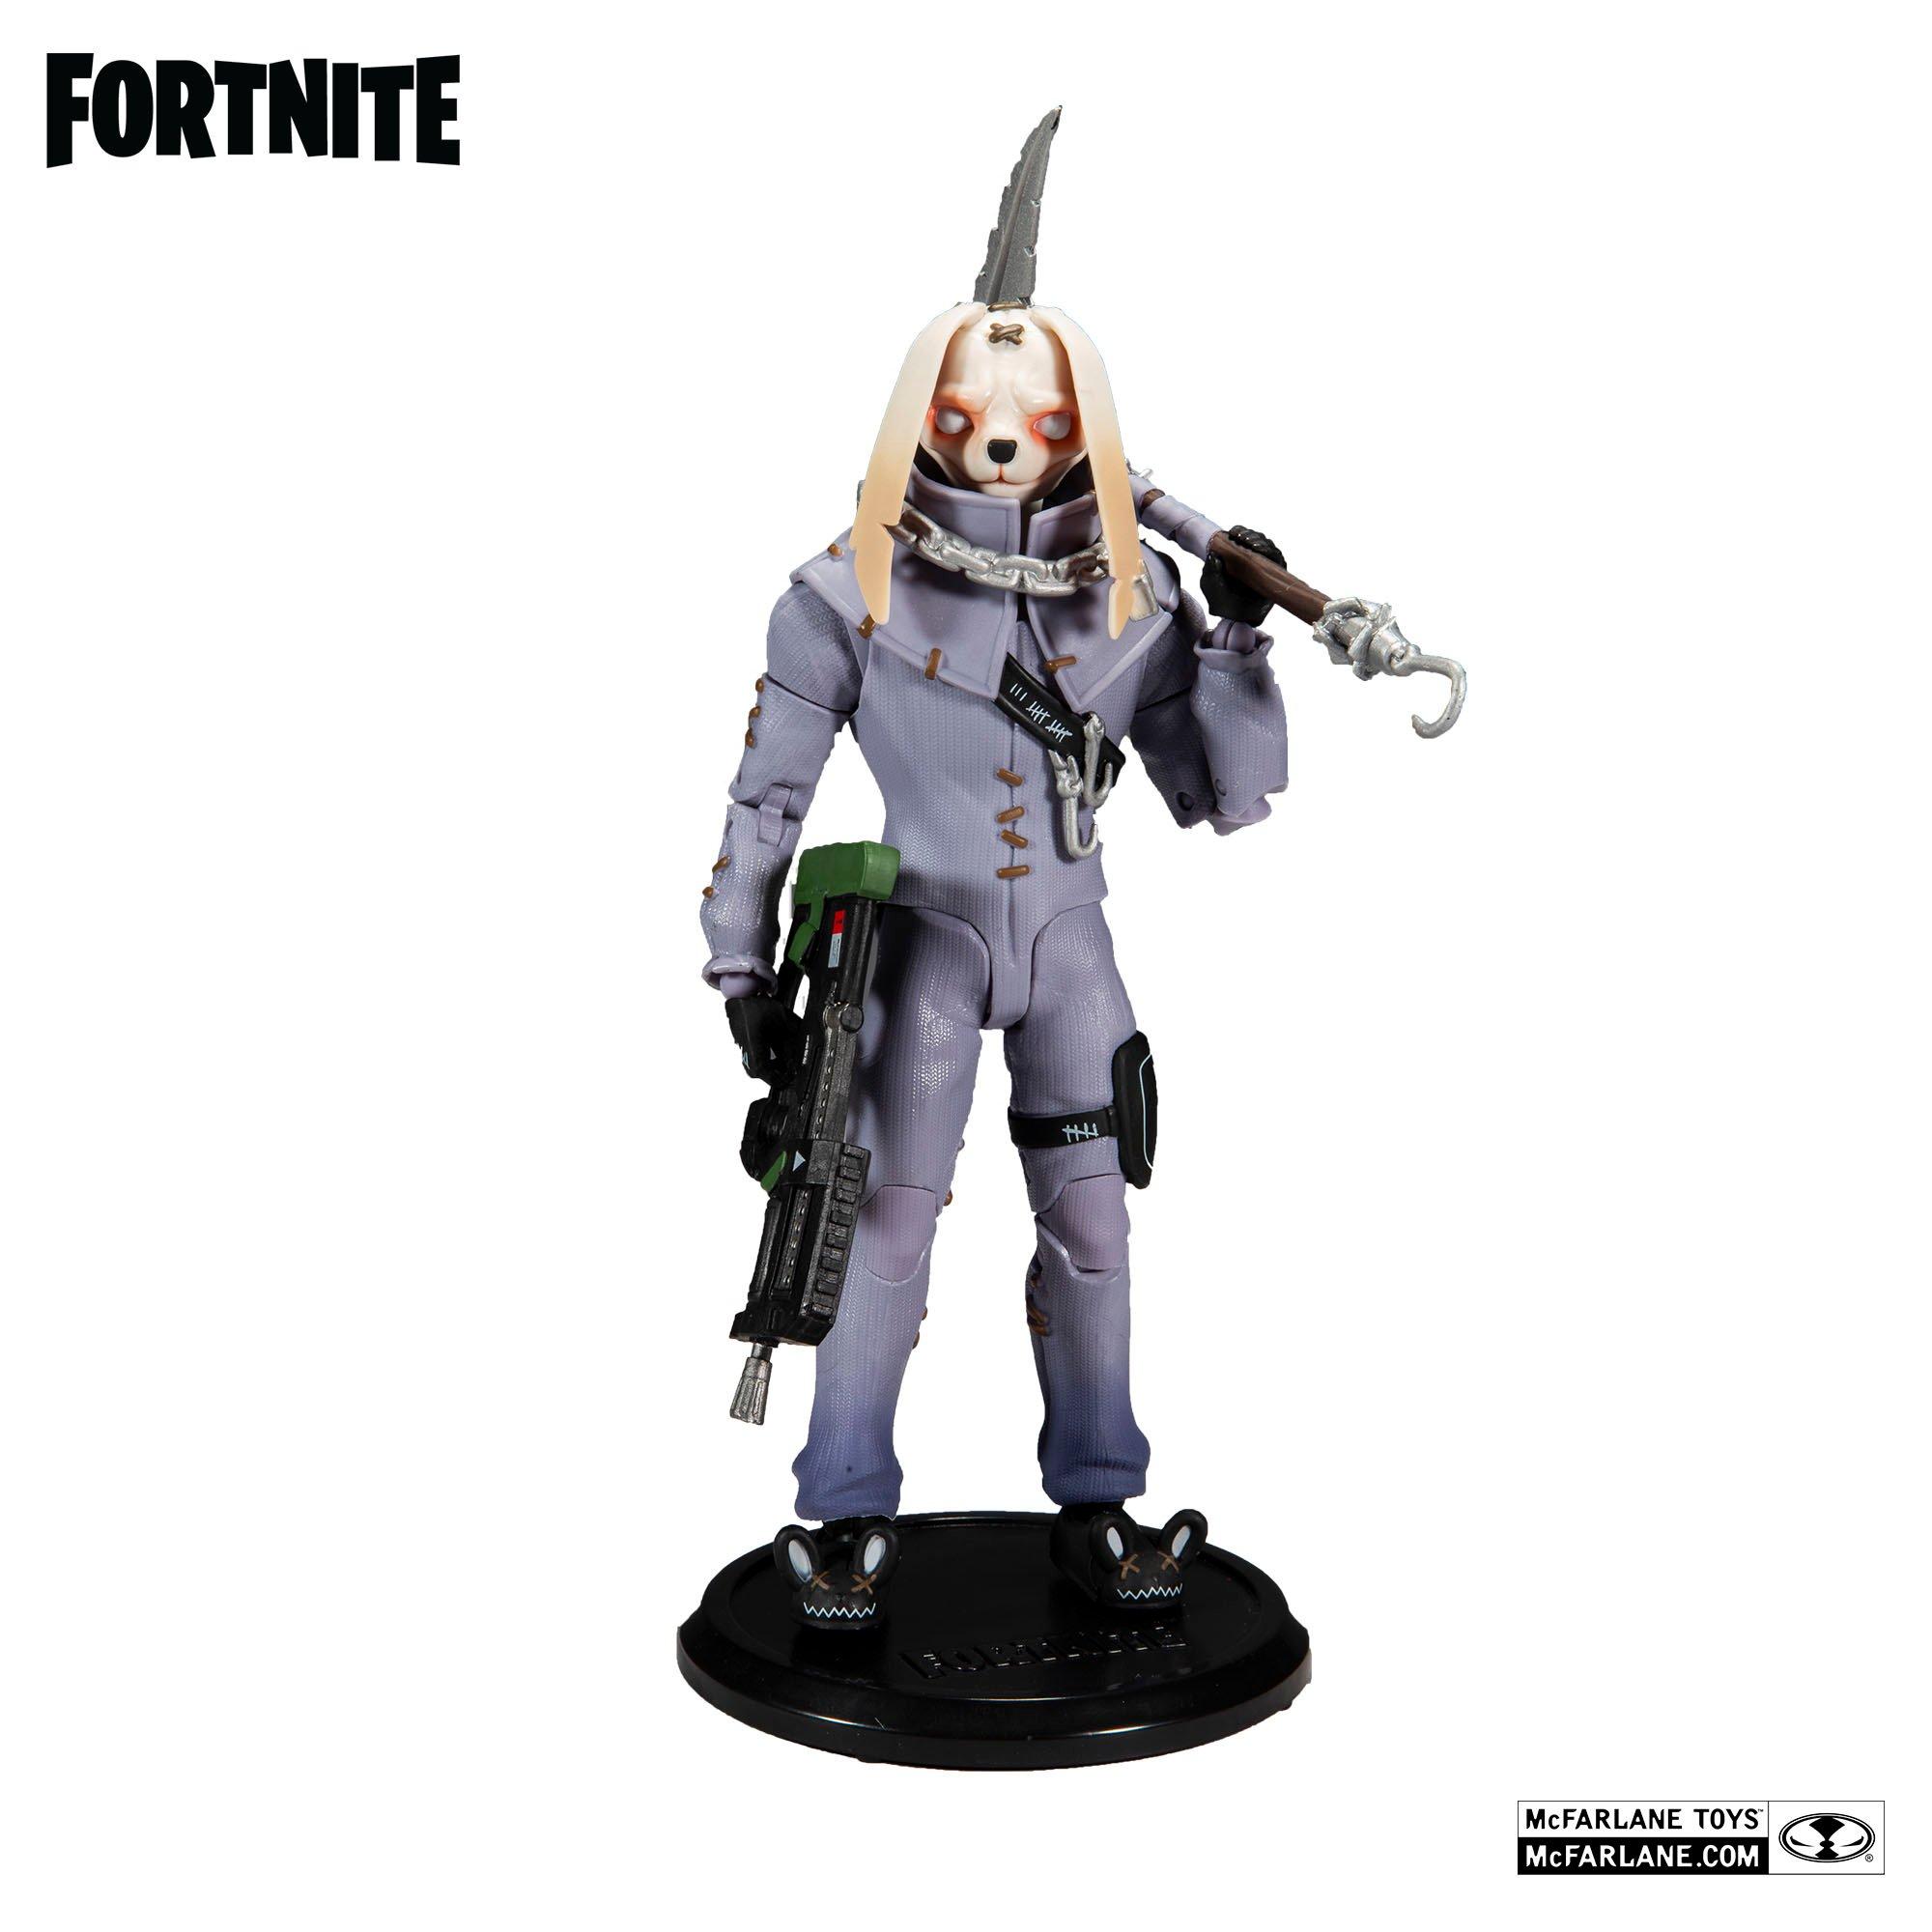 where can i buy fortnite action figures